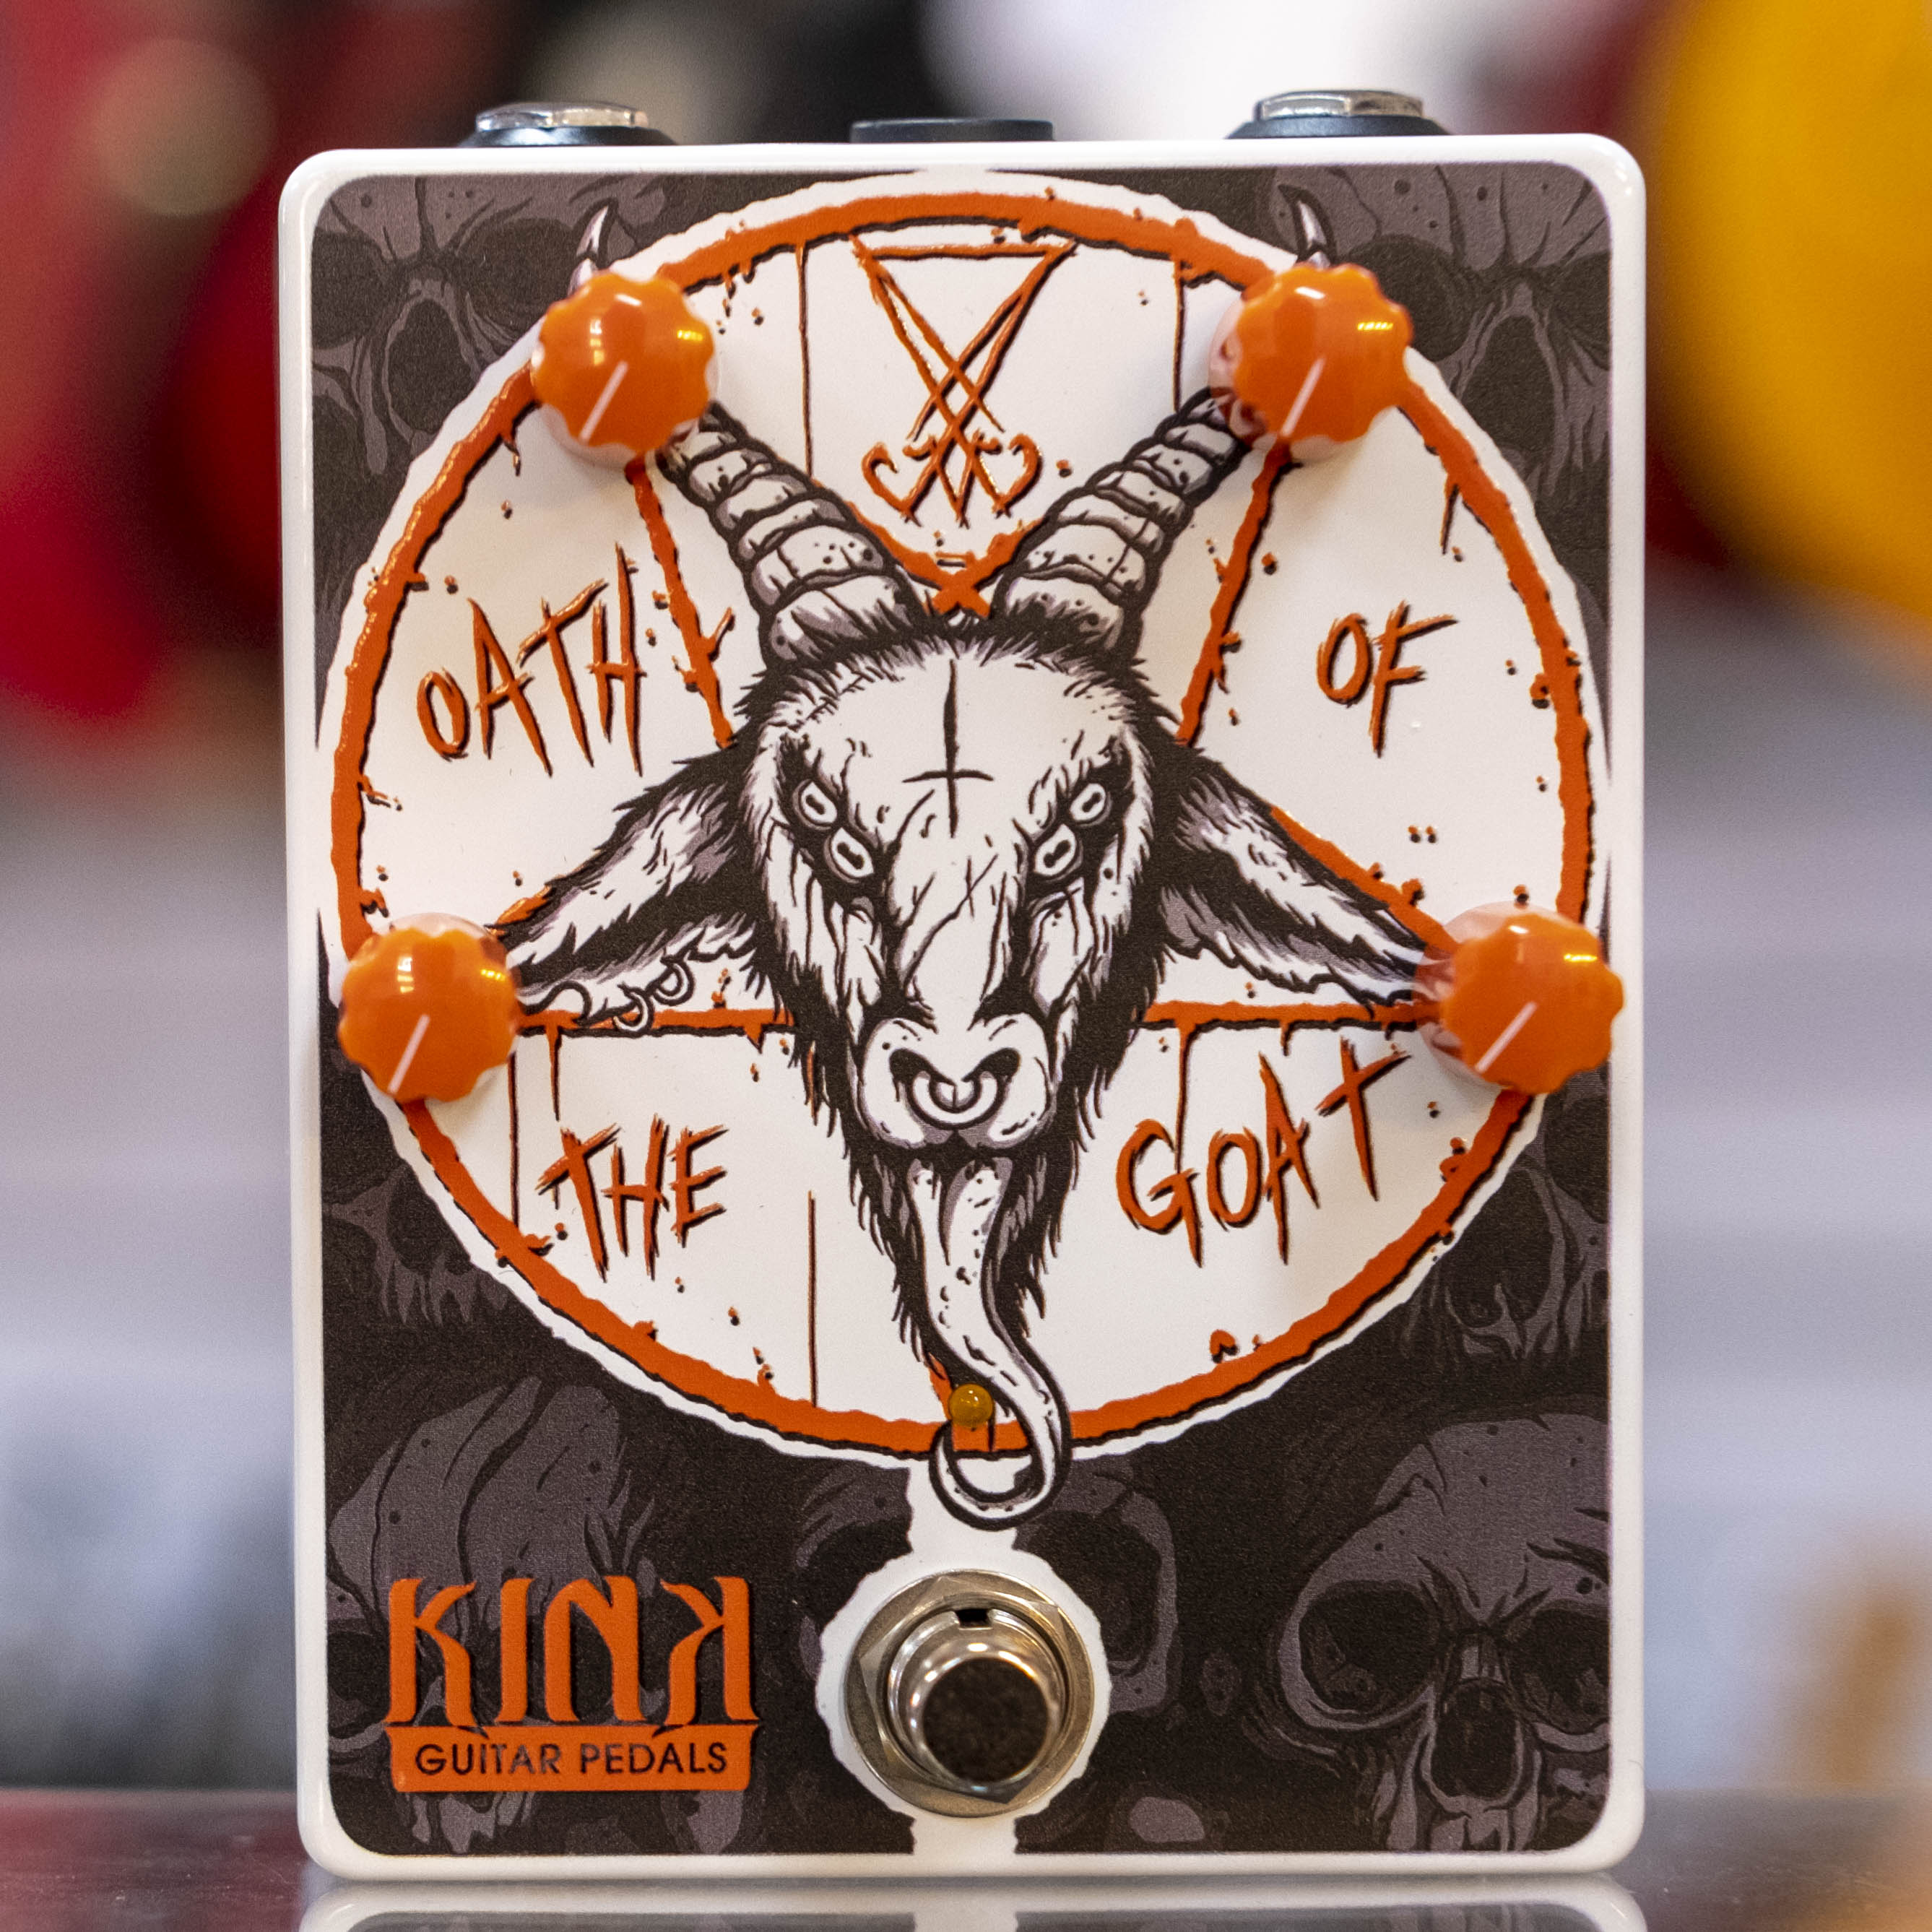 Kink Guitar Pedals Oath of the Goat Distortion Pedal